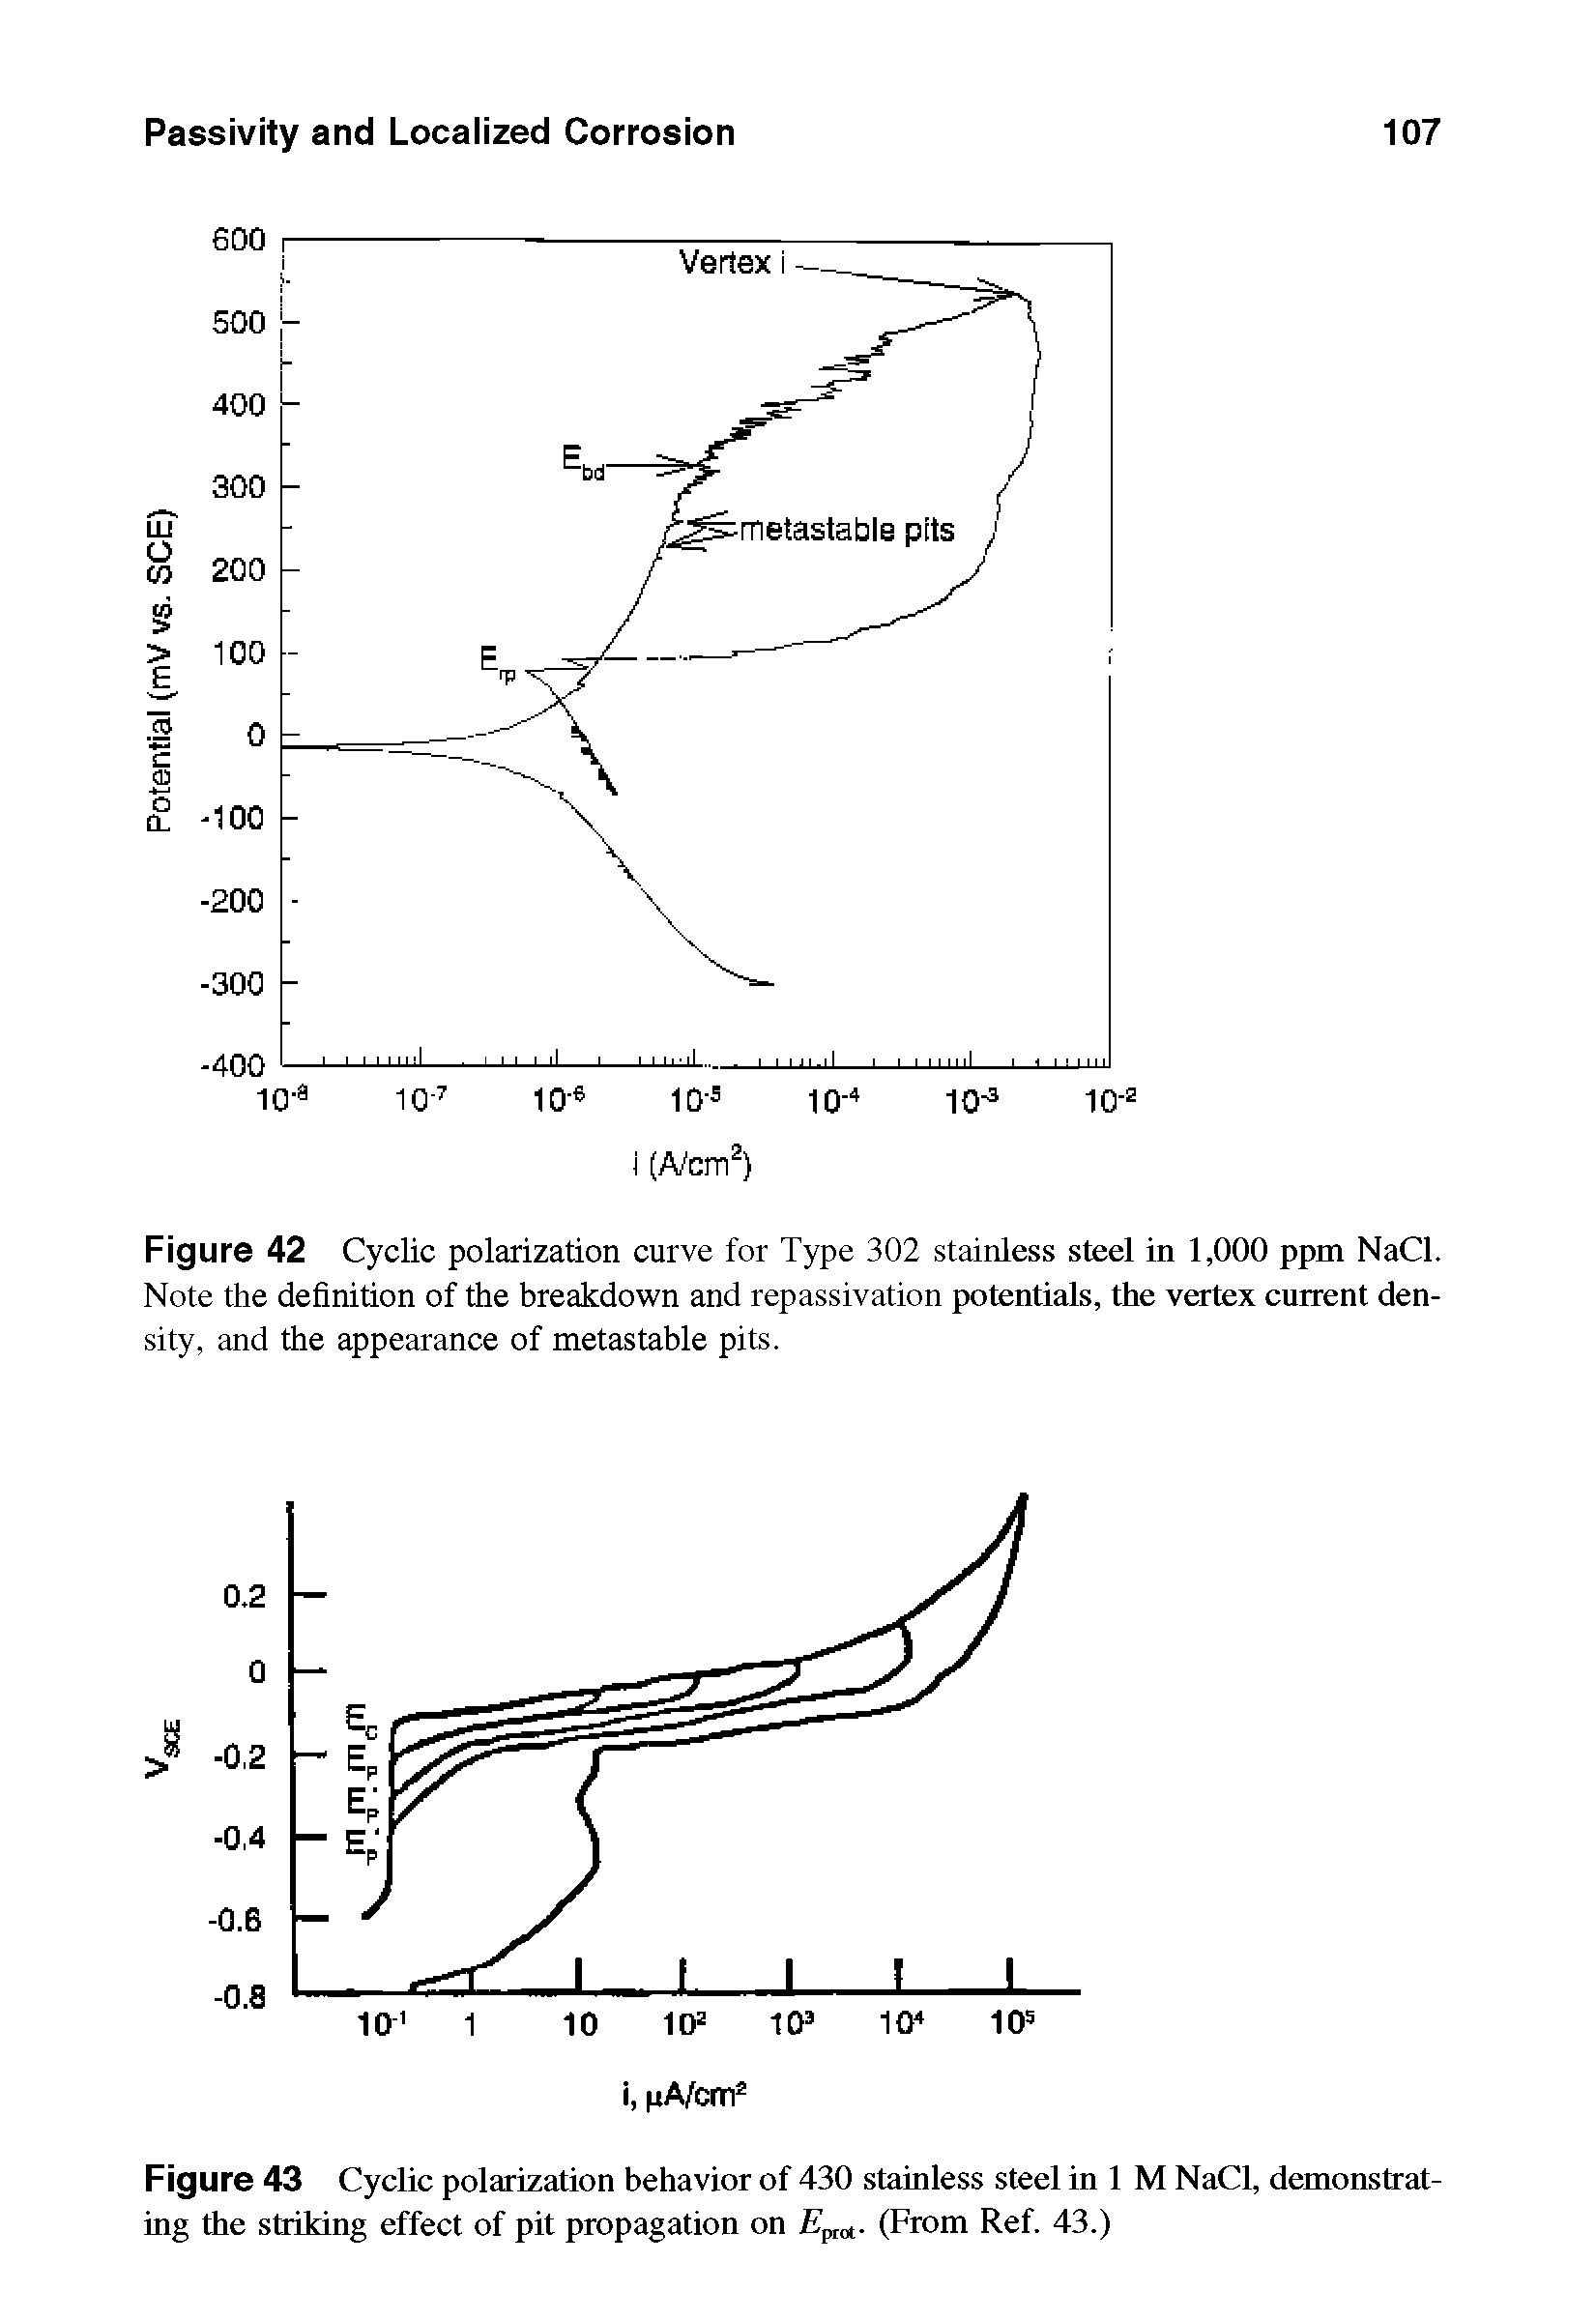 Figure 42 Cyclic polarization curve for Type 302 stainless steel in 1,000 ppm NaCl. Note the definition of the breakdown and repassivation potentials, the vertex current density, and the appearance of metastable pits.